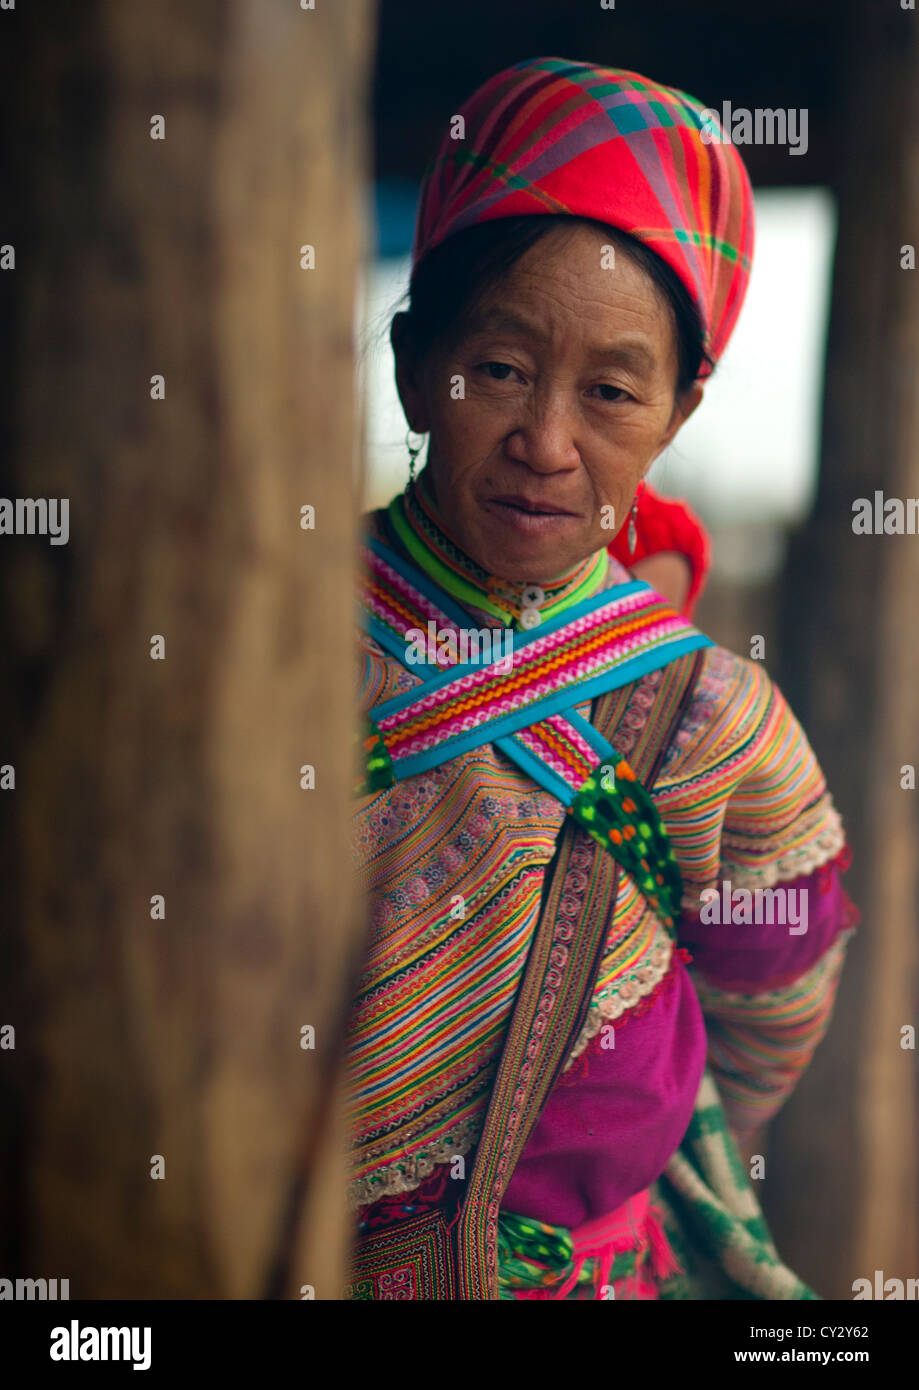 Old Flower Hmong Woman In Traditional Dress, Sapa Market, Vietnam Stock Photo